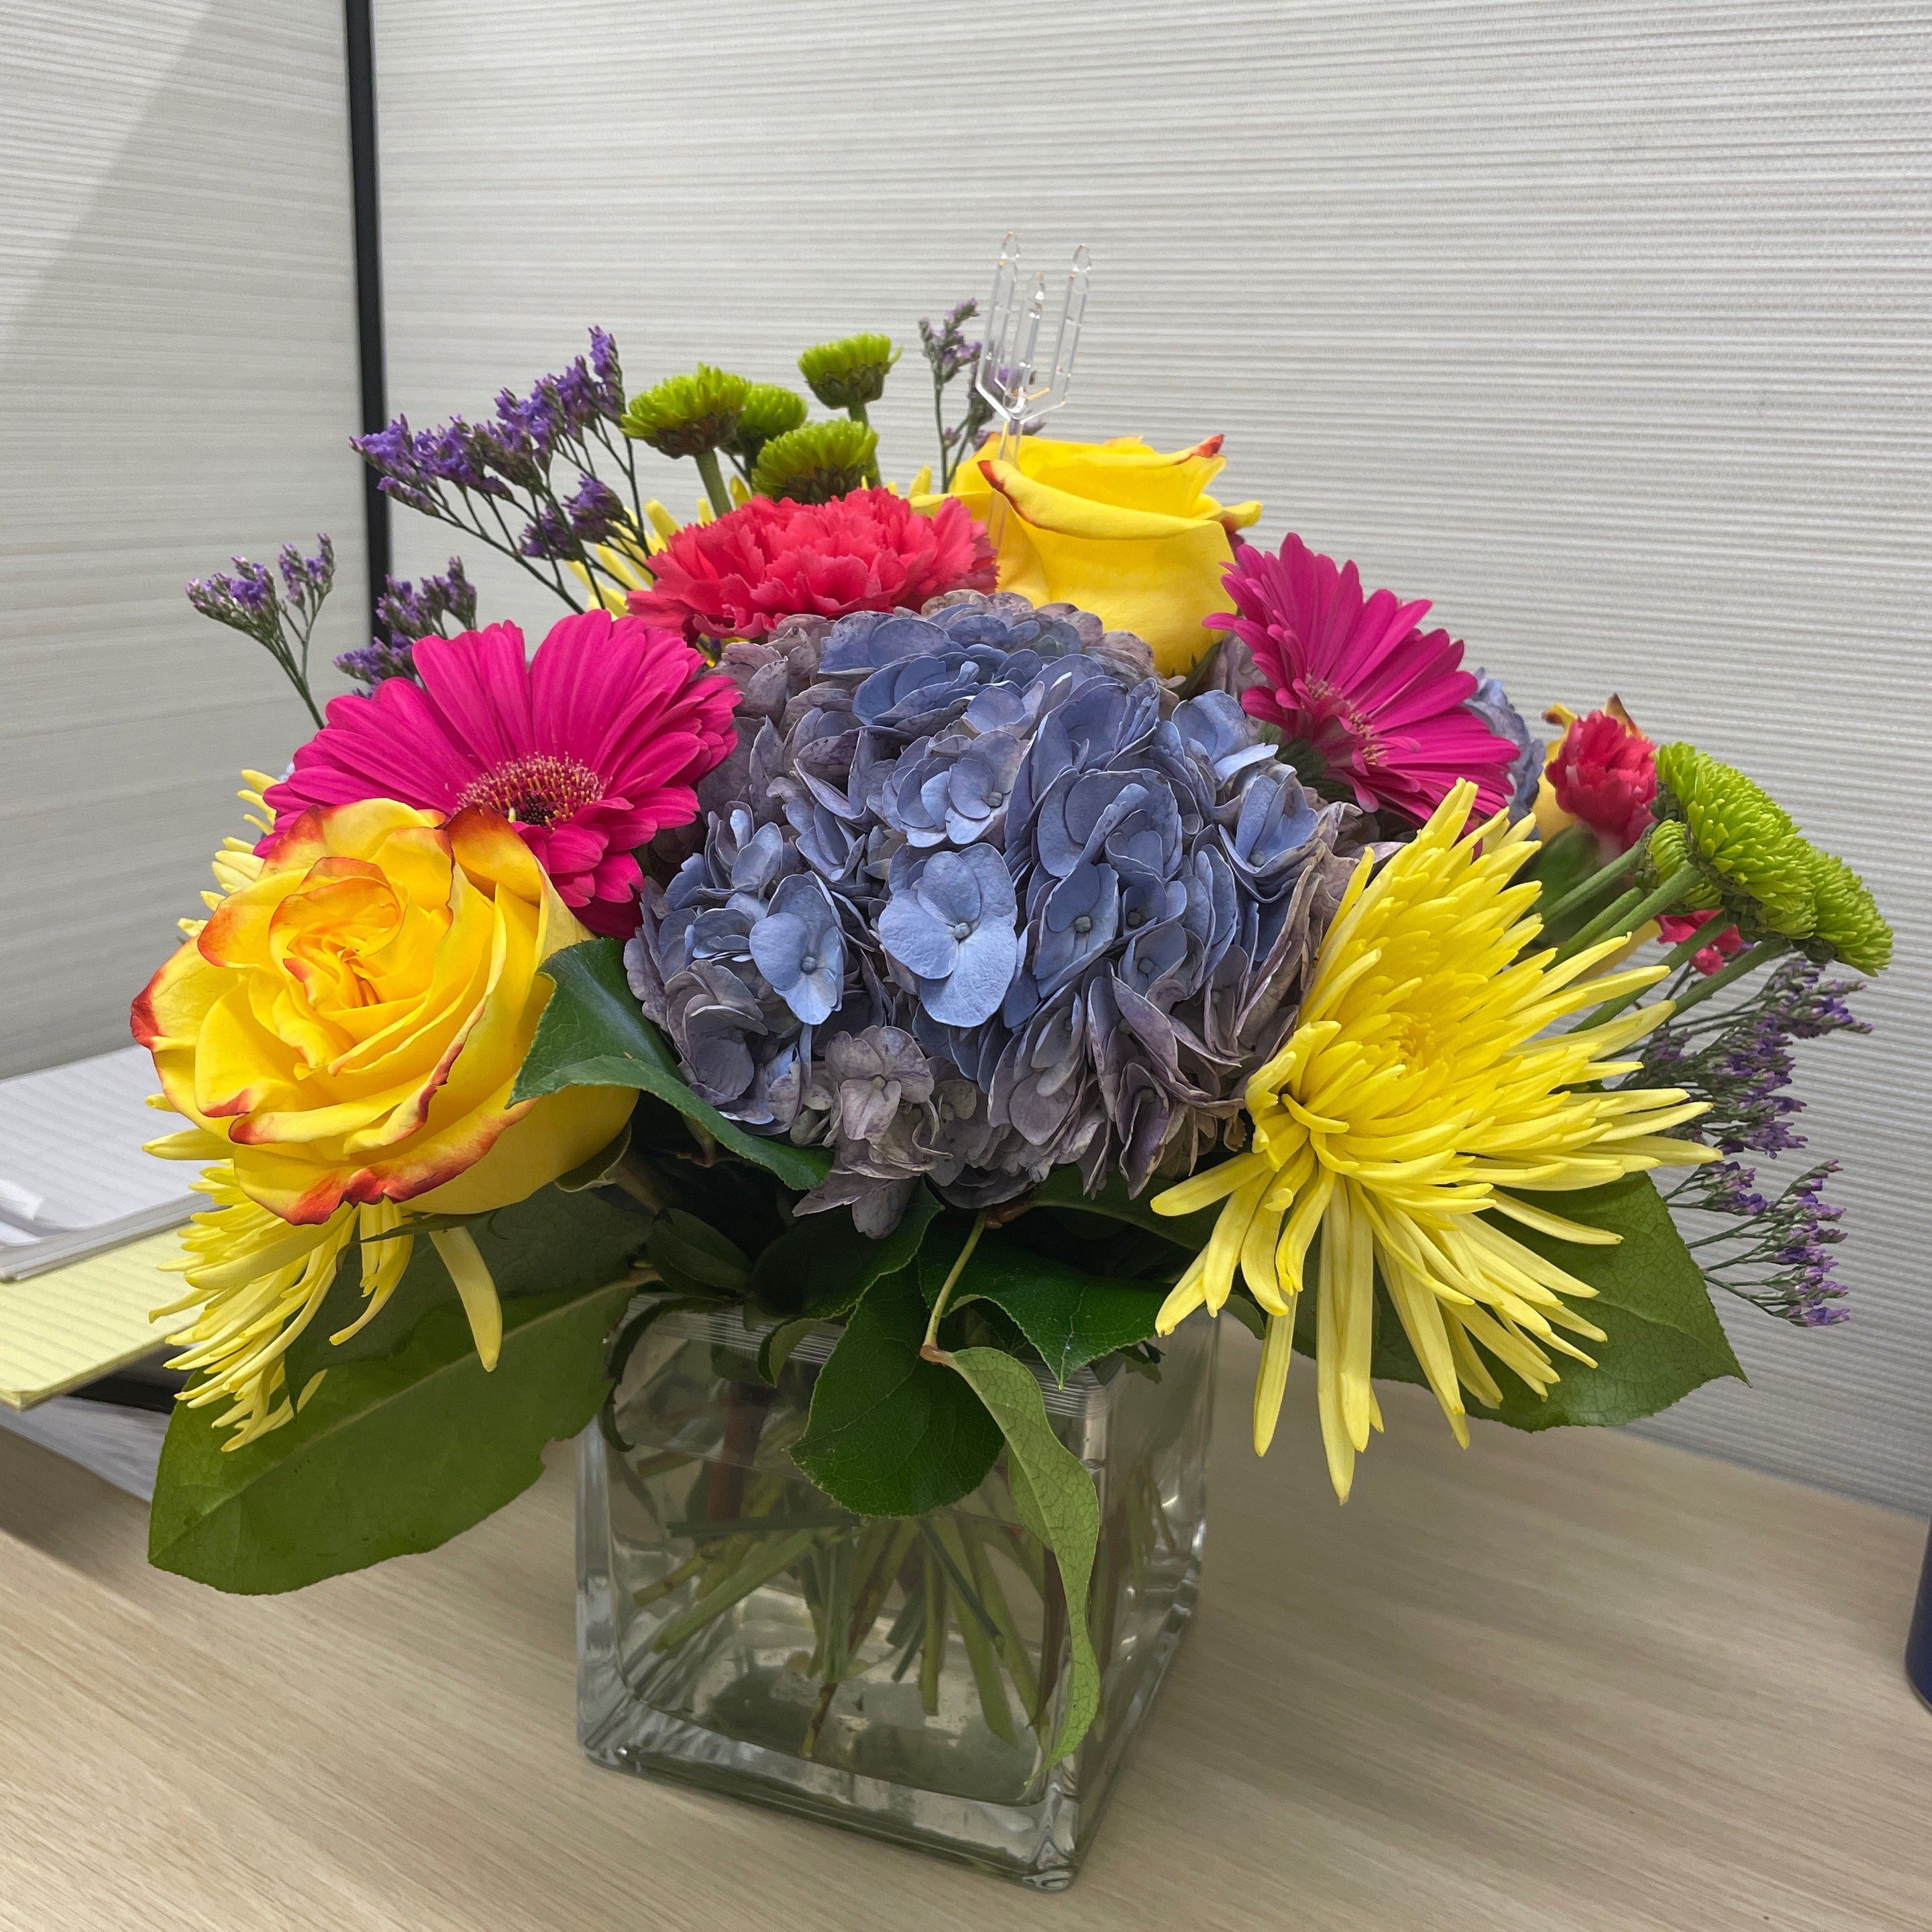 Recipient-submitted photo of Blooming Medley. Flowers placed in an office cubicle.